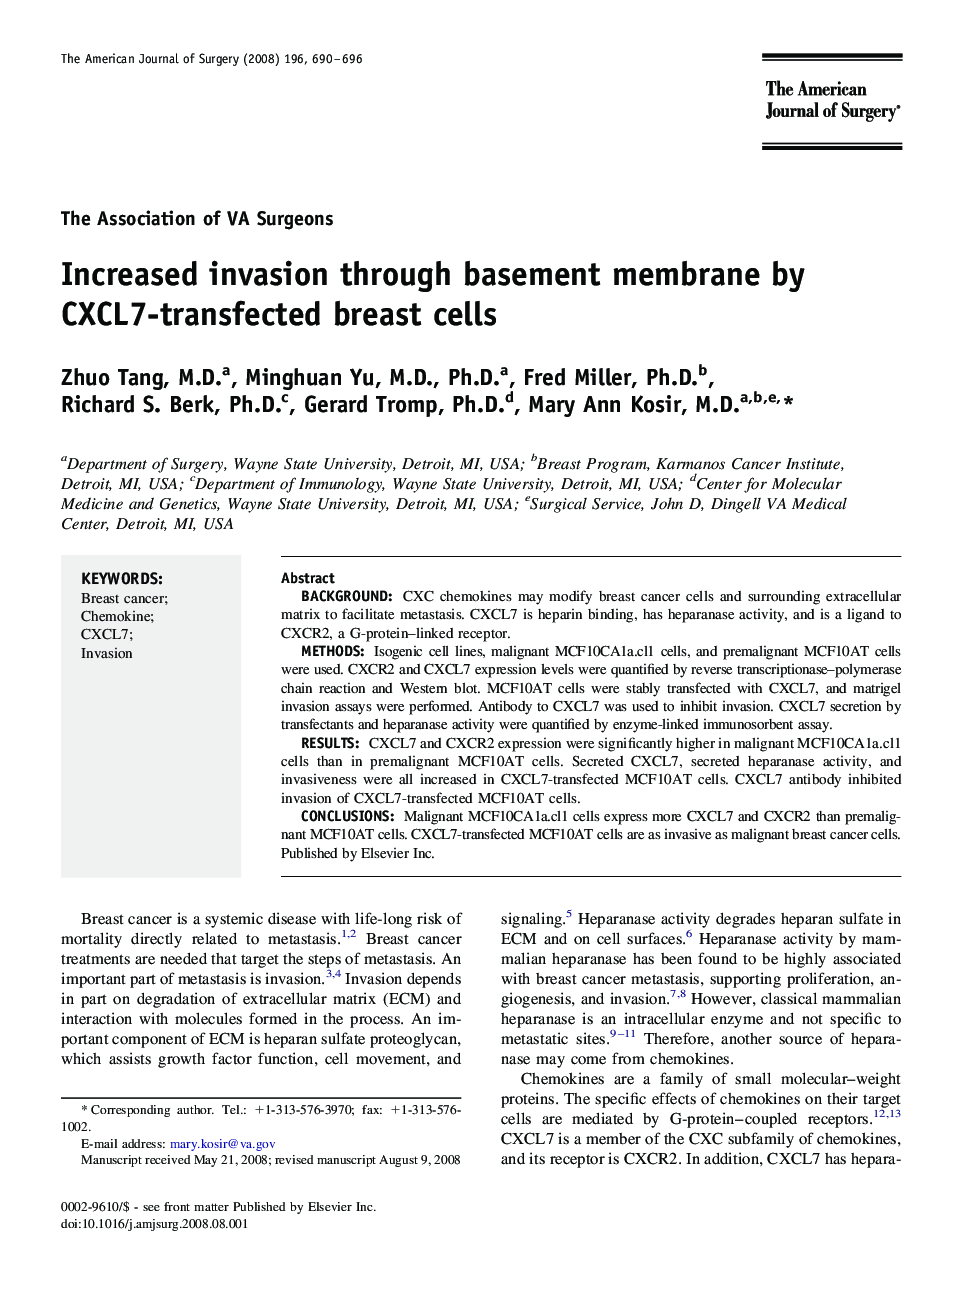 Increased invasion through basement membrane by CXCL7-transfected breast cells